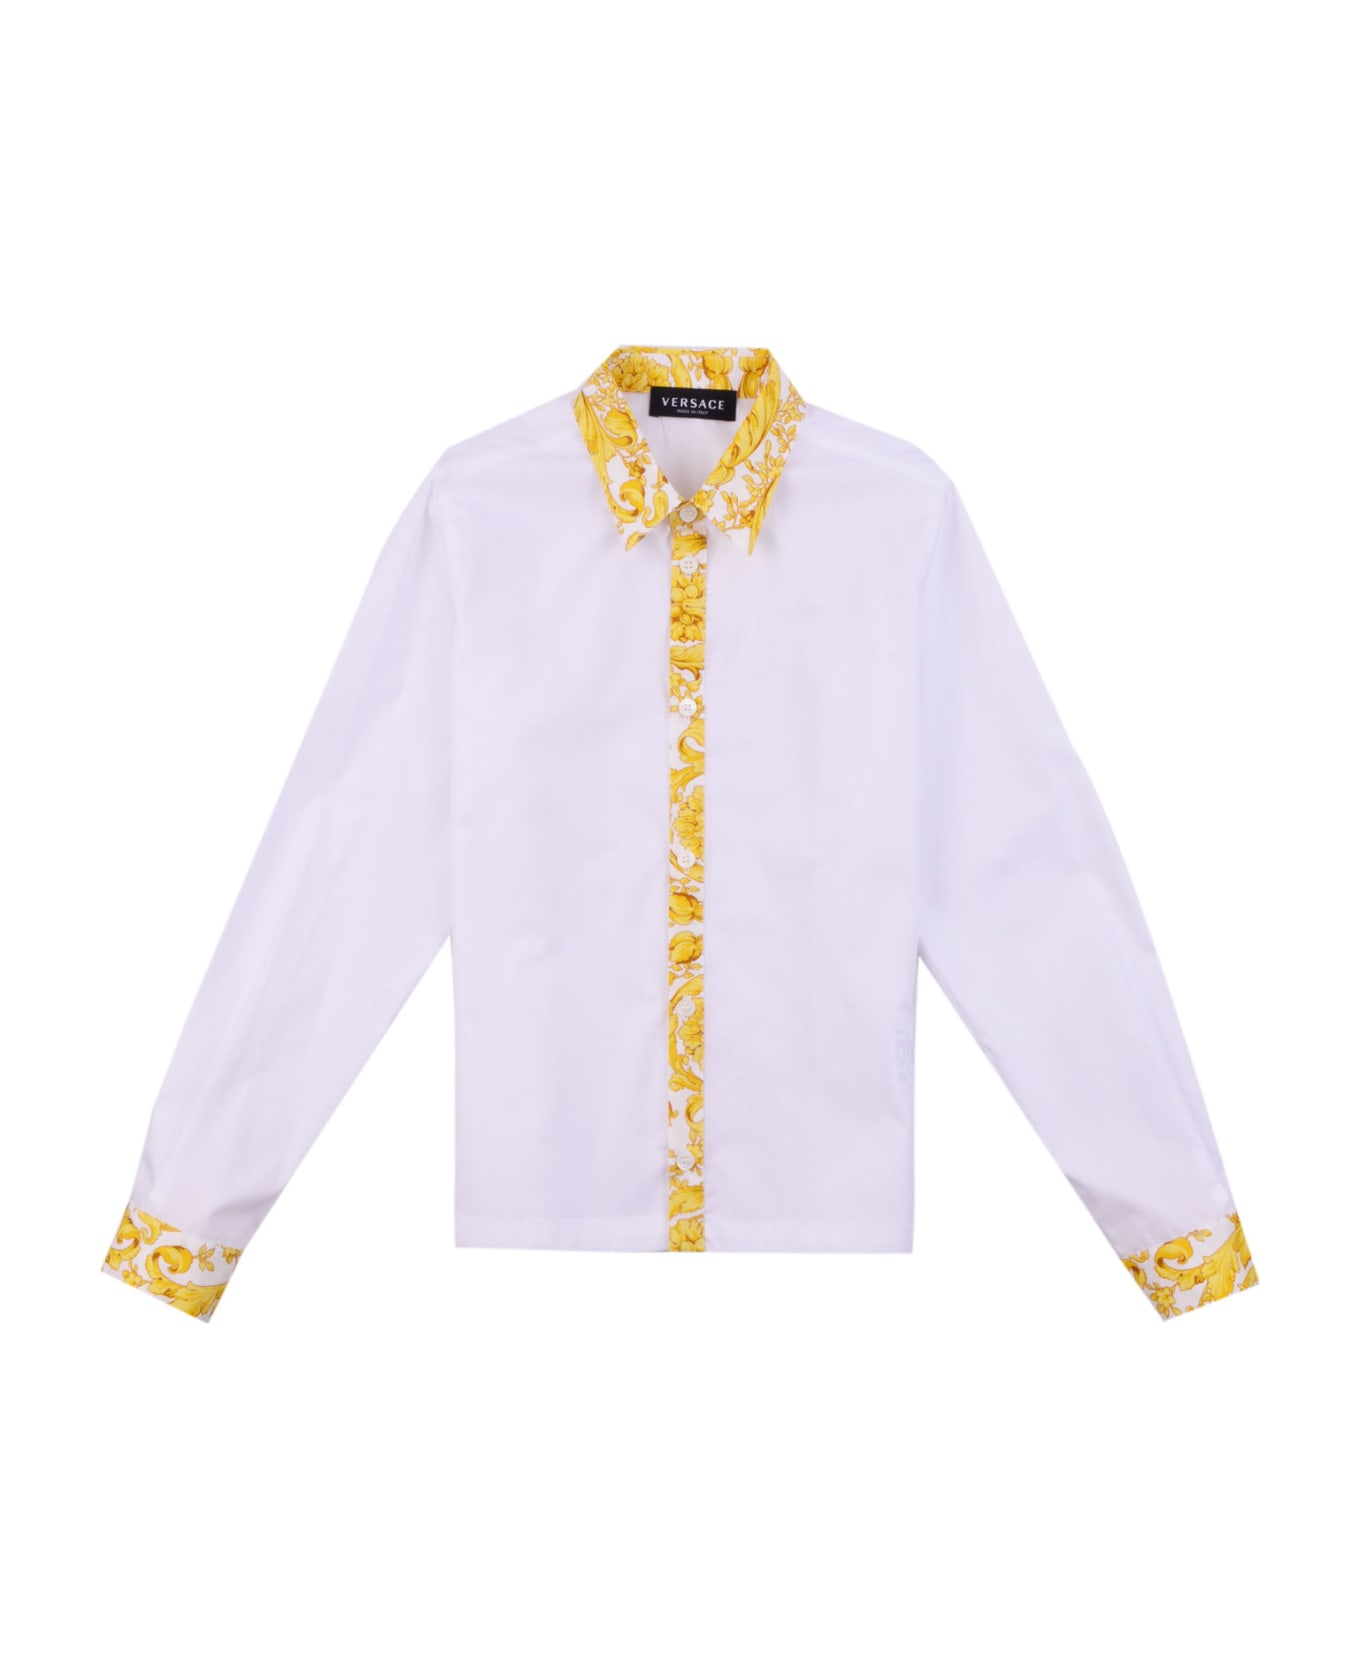 Versace Shirt With Baroque Print - White